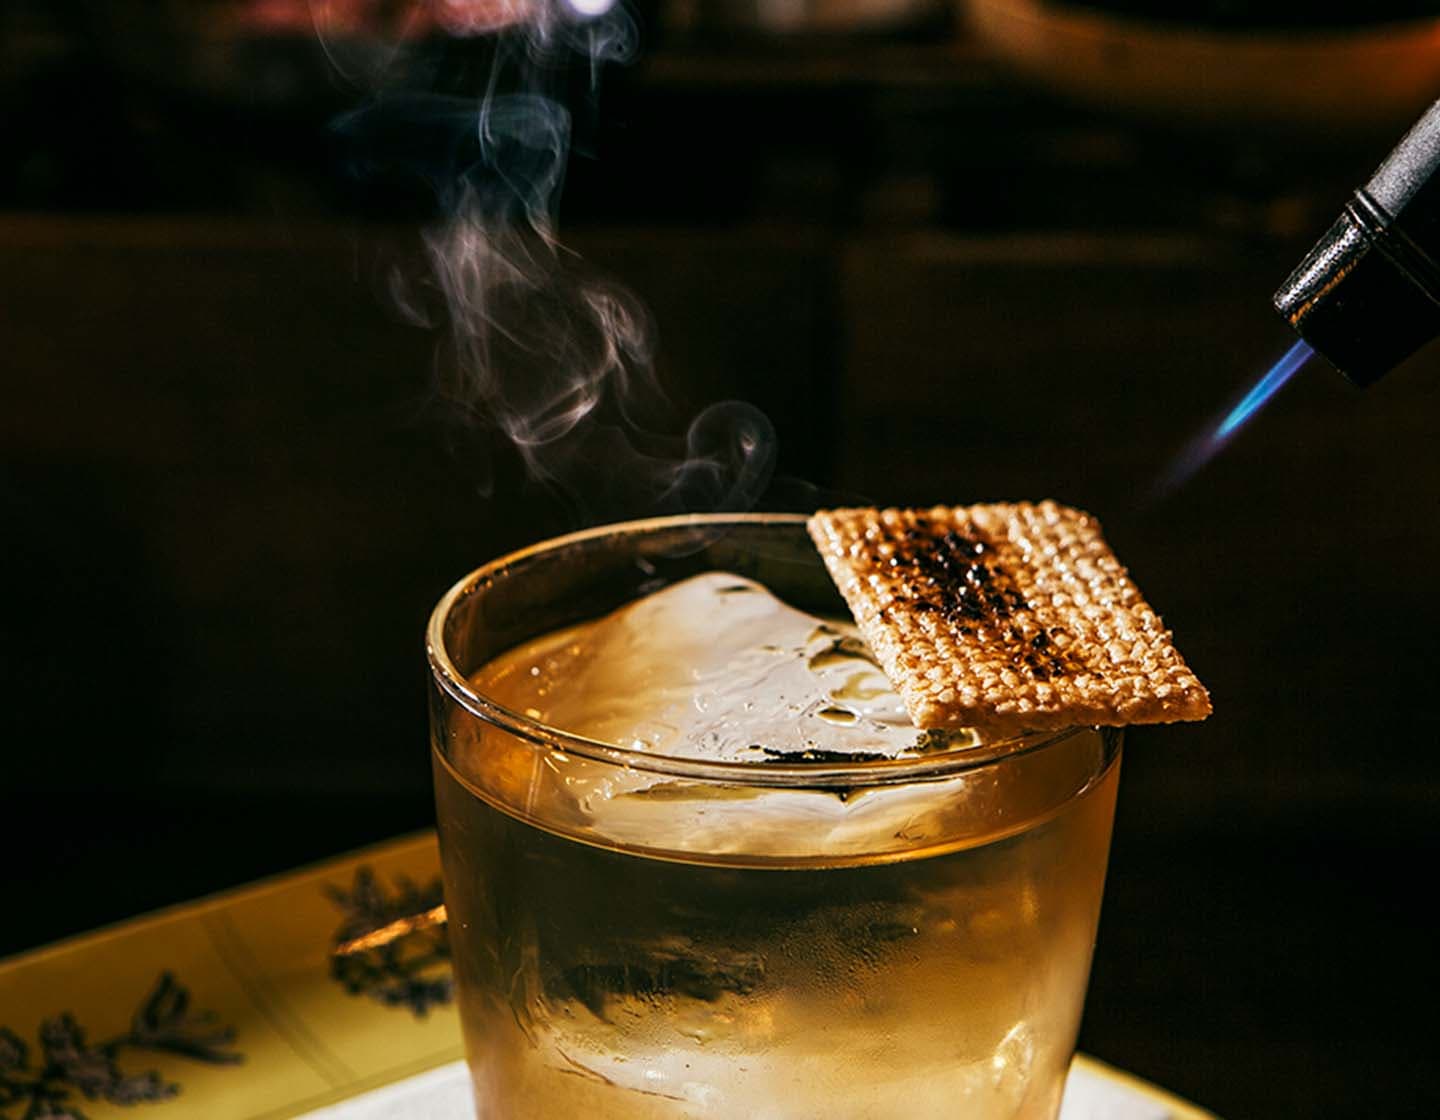 Blowtorch caramelising garnish on top of Tokyo drift cocktail in Keefers Bar